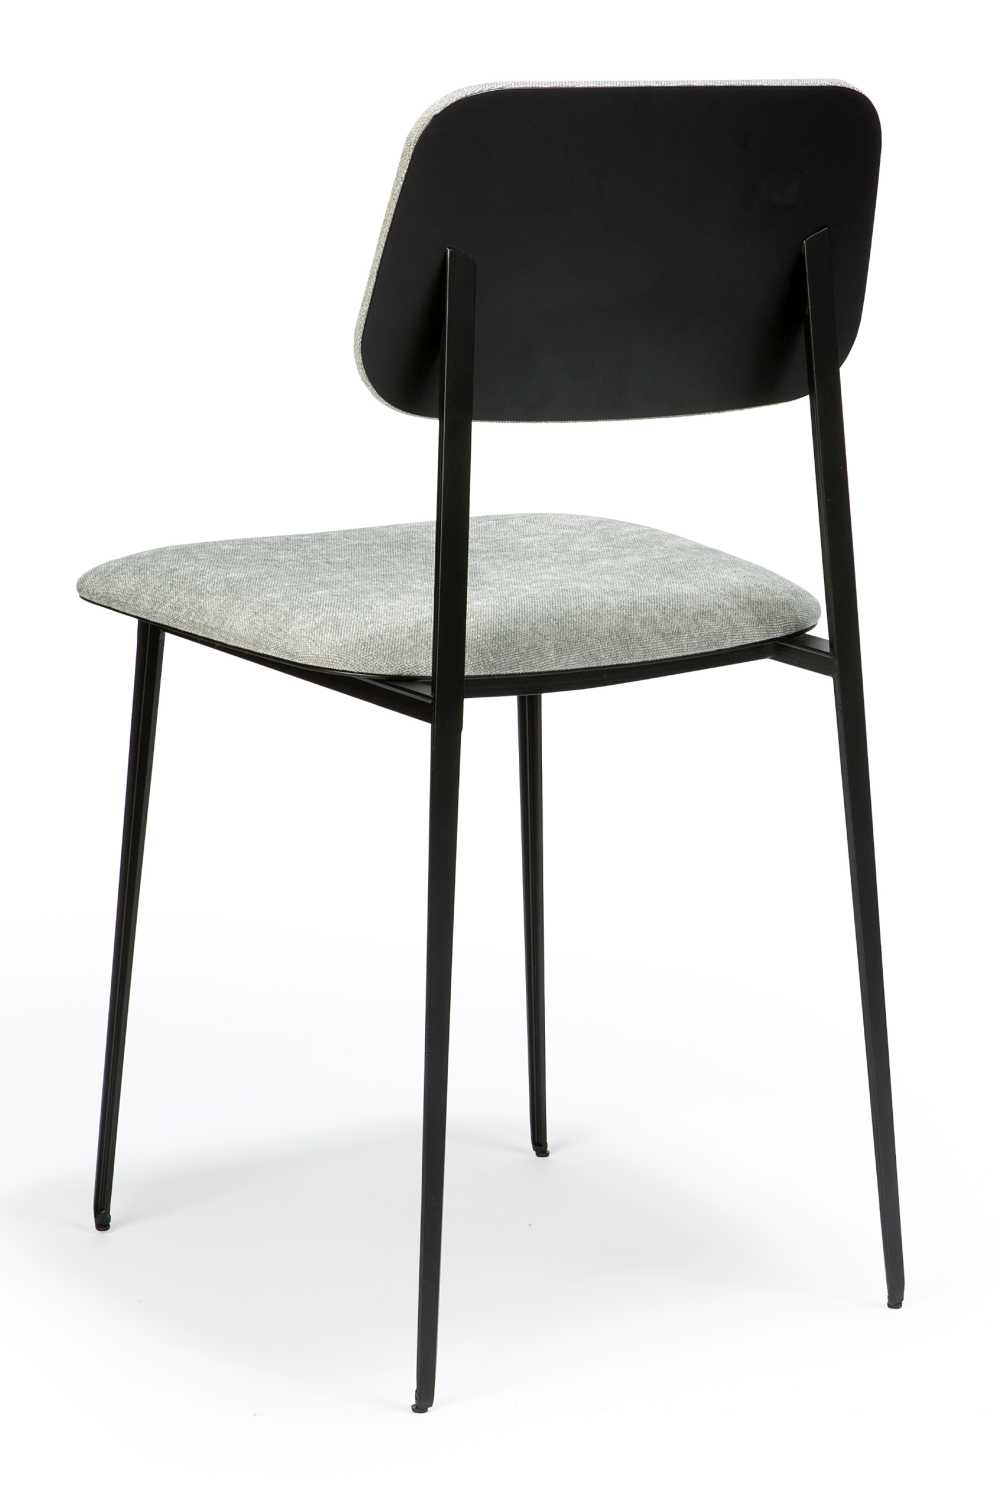 Industrial Dining Chair | Ethnicraft DC | Oroa.com